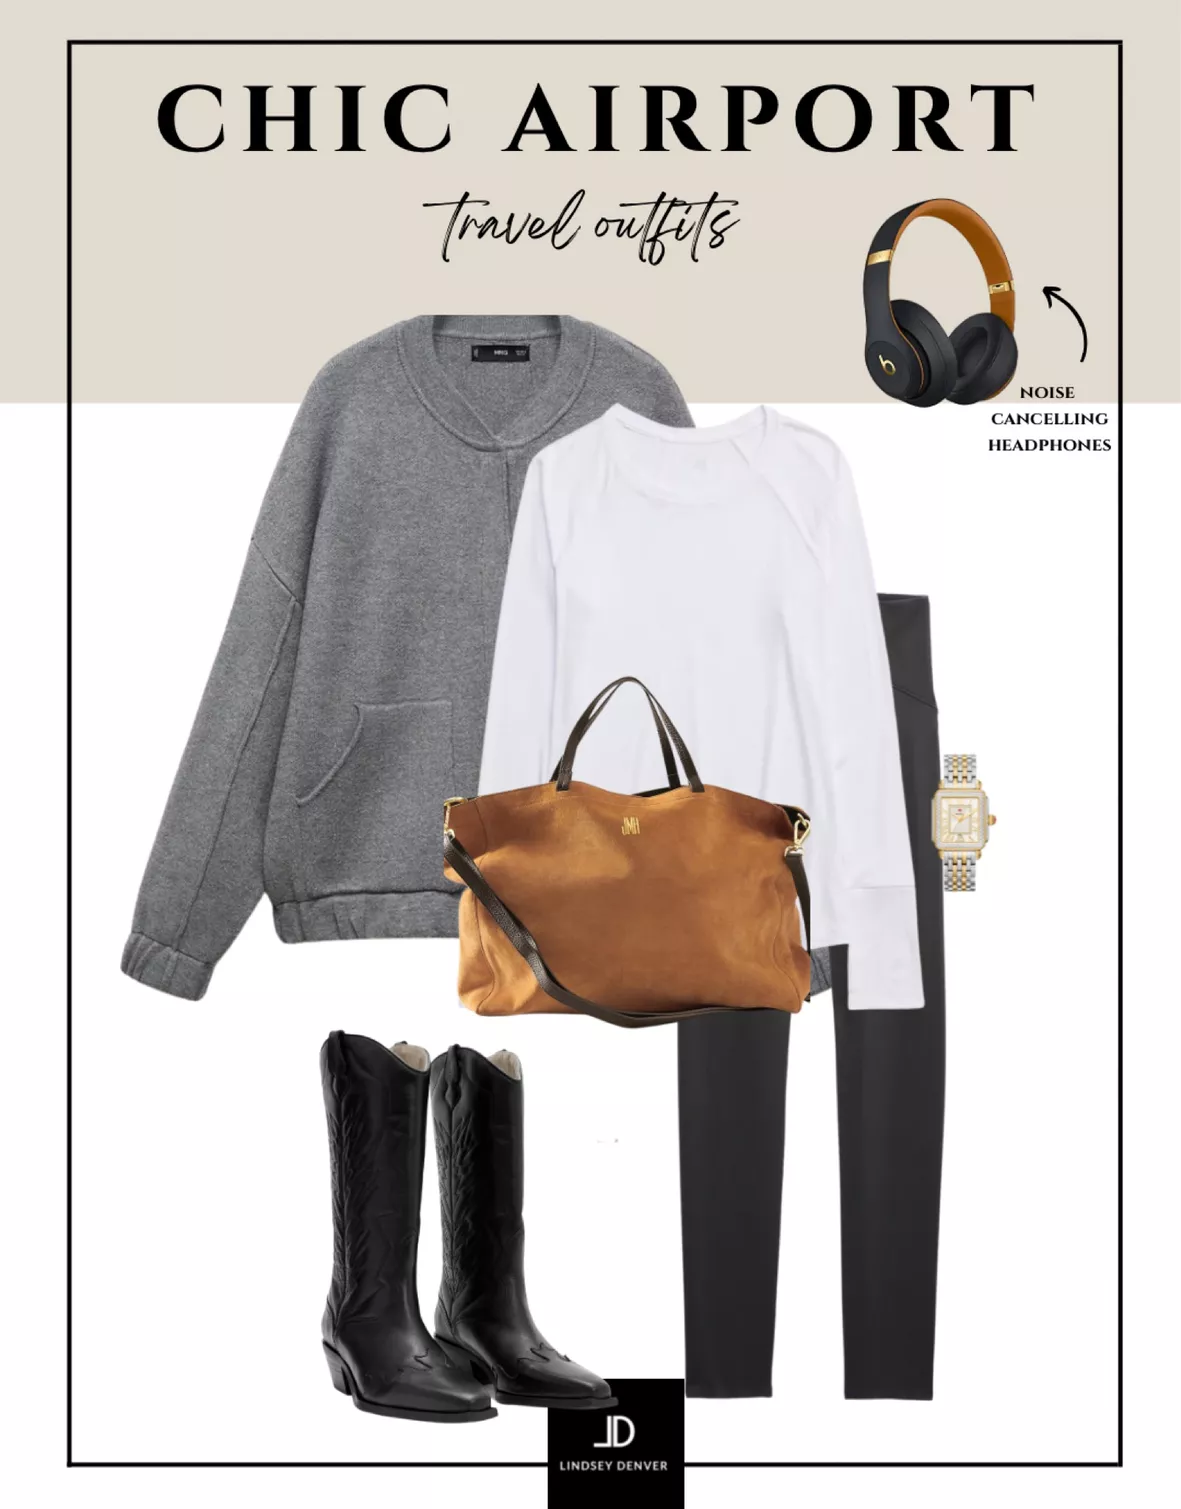 My Favorite Airport Outfits & Travel Essentials for Jetsetters